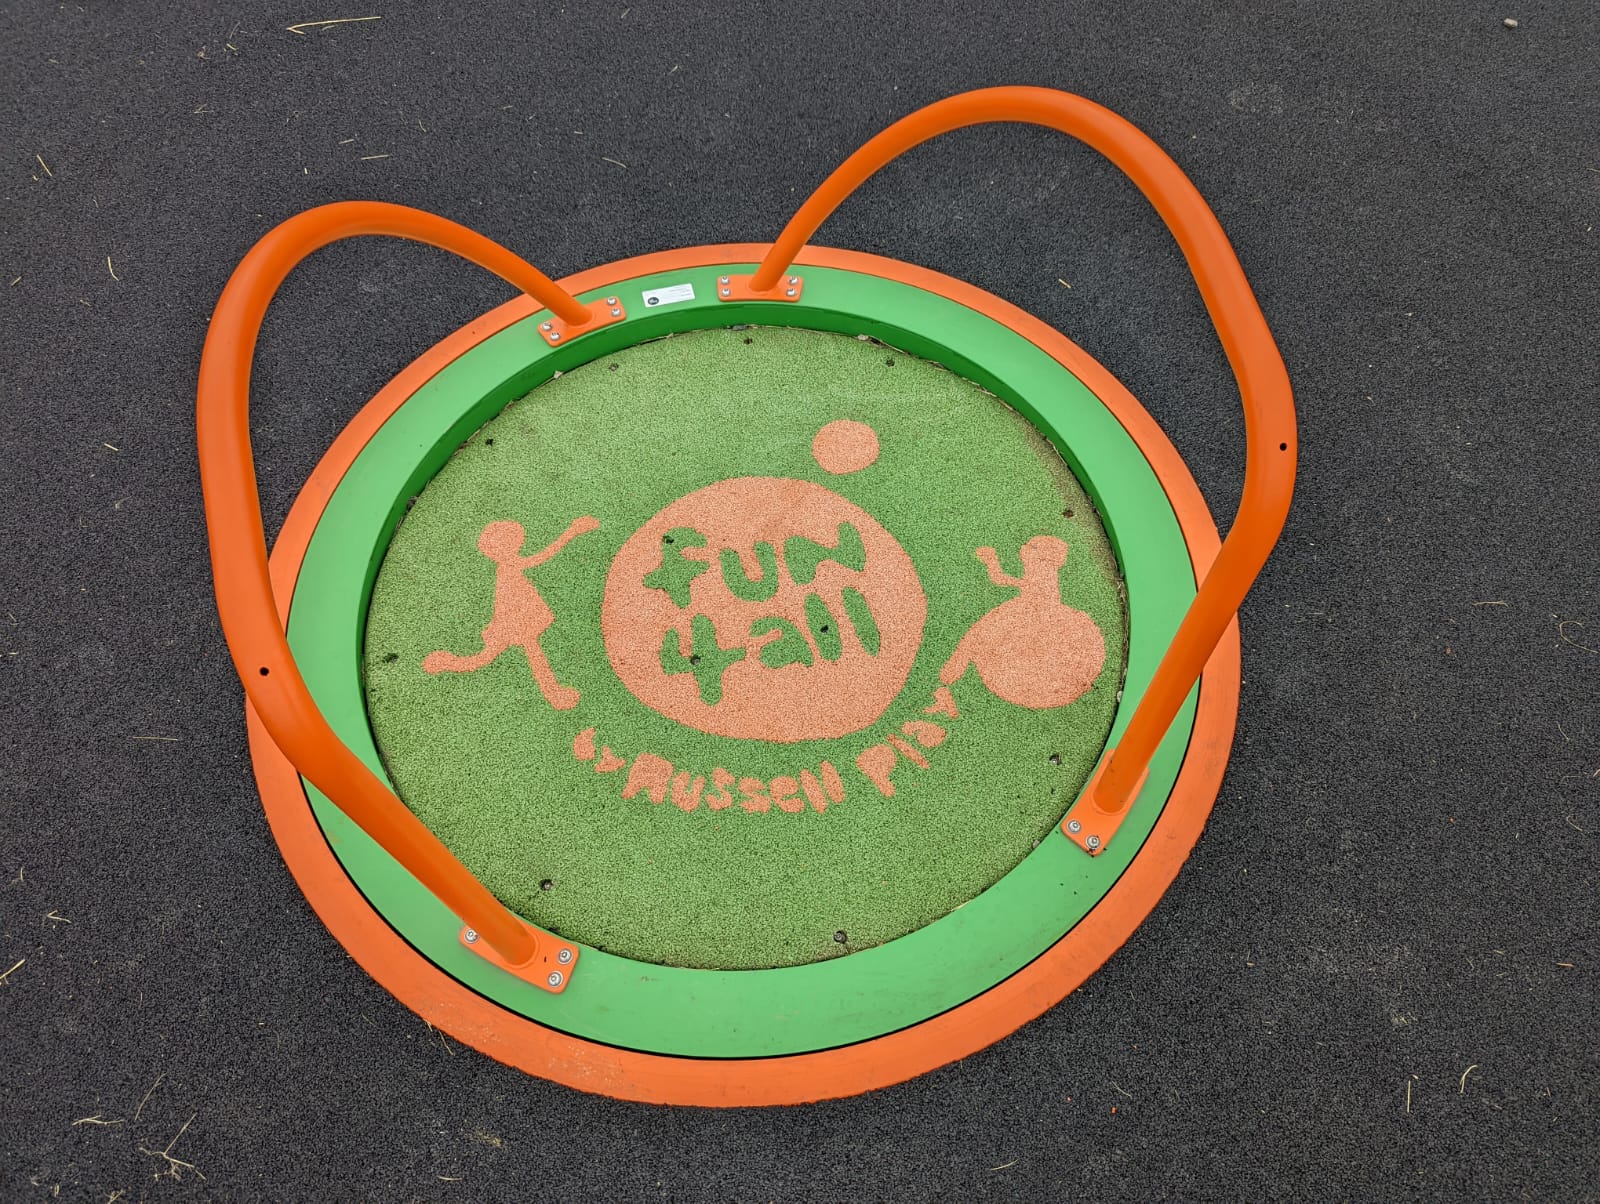 Russell Play Equipment